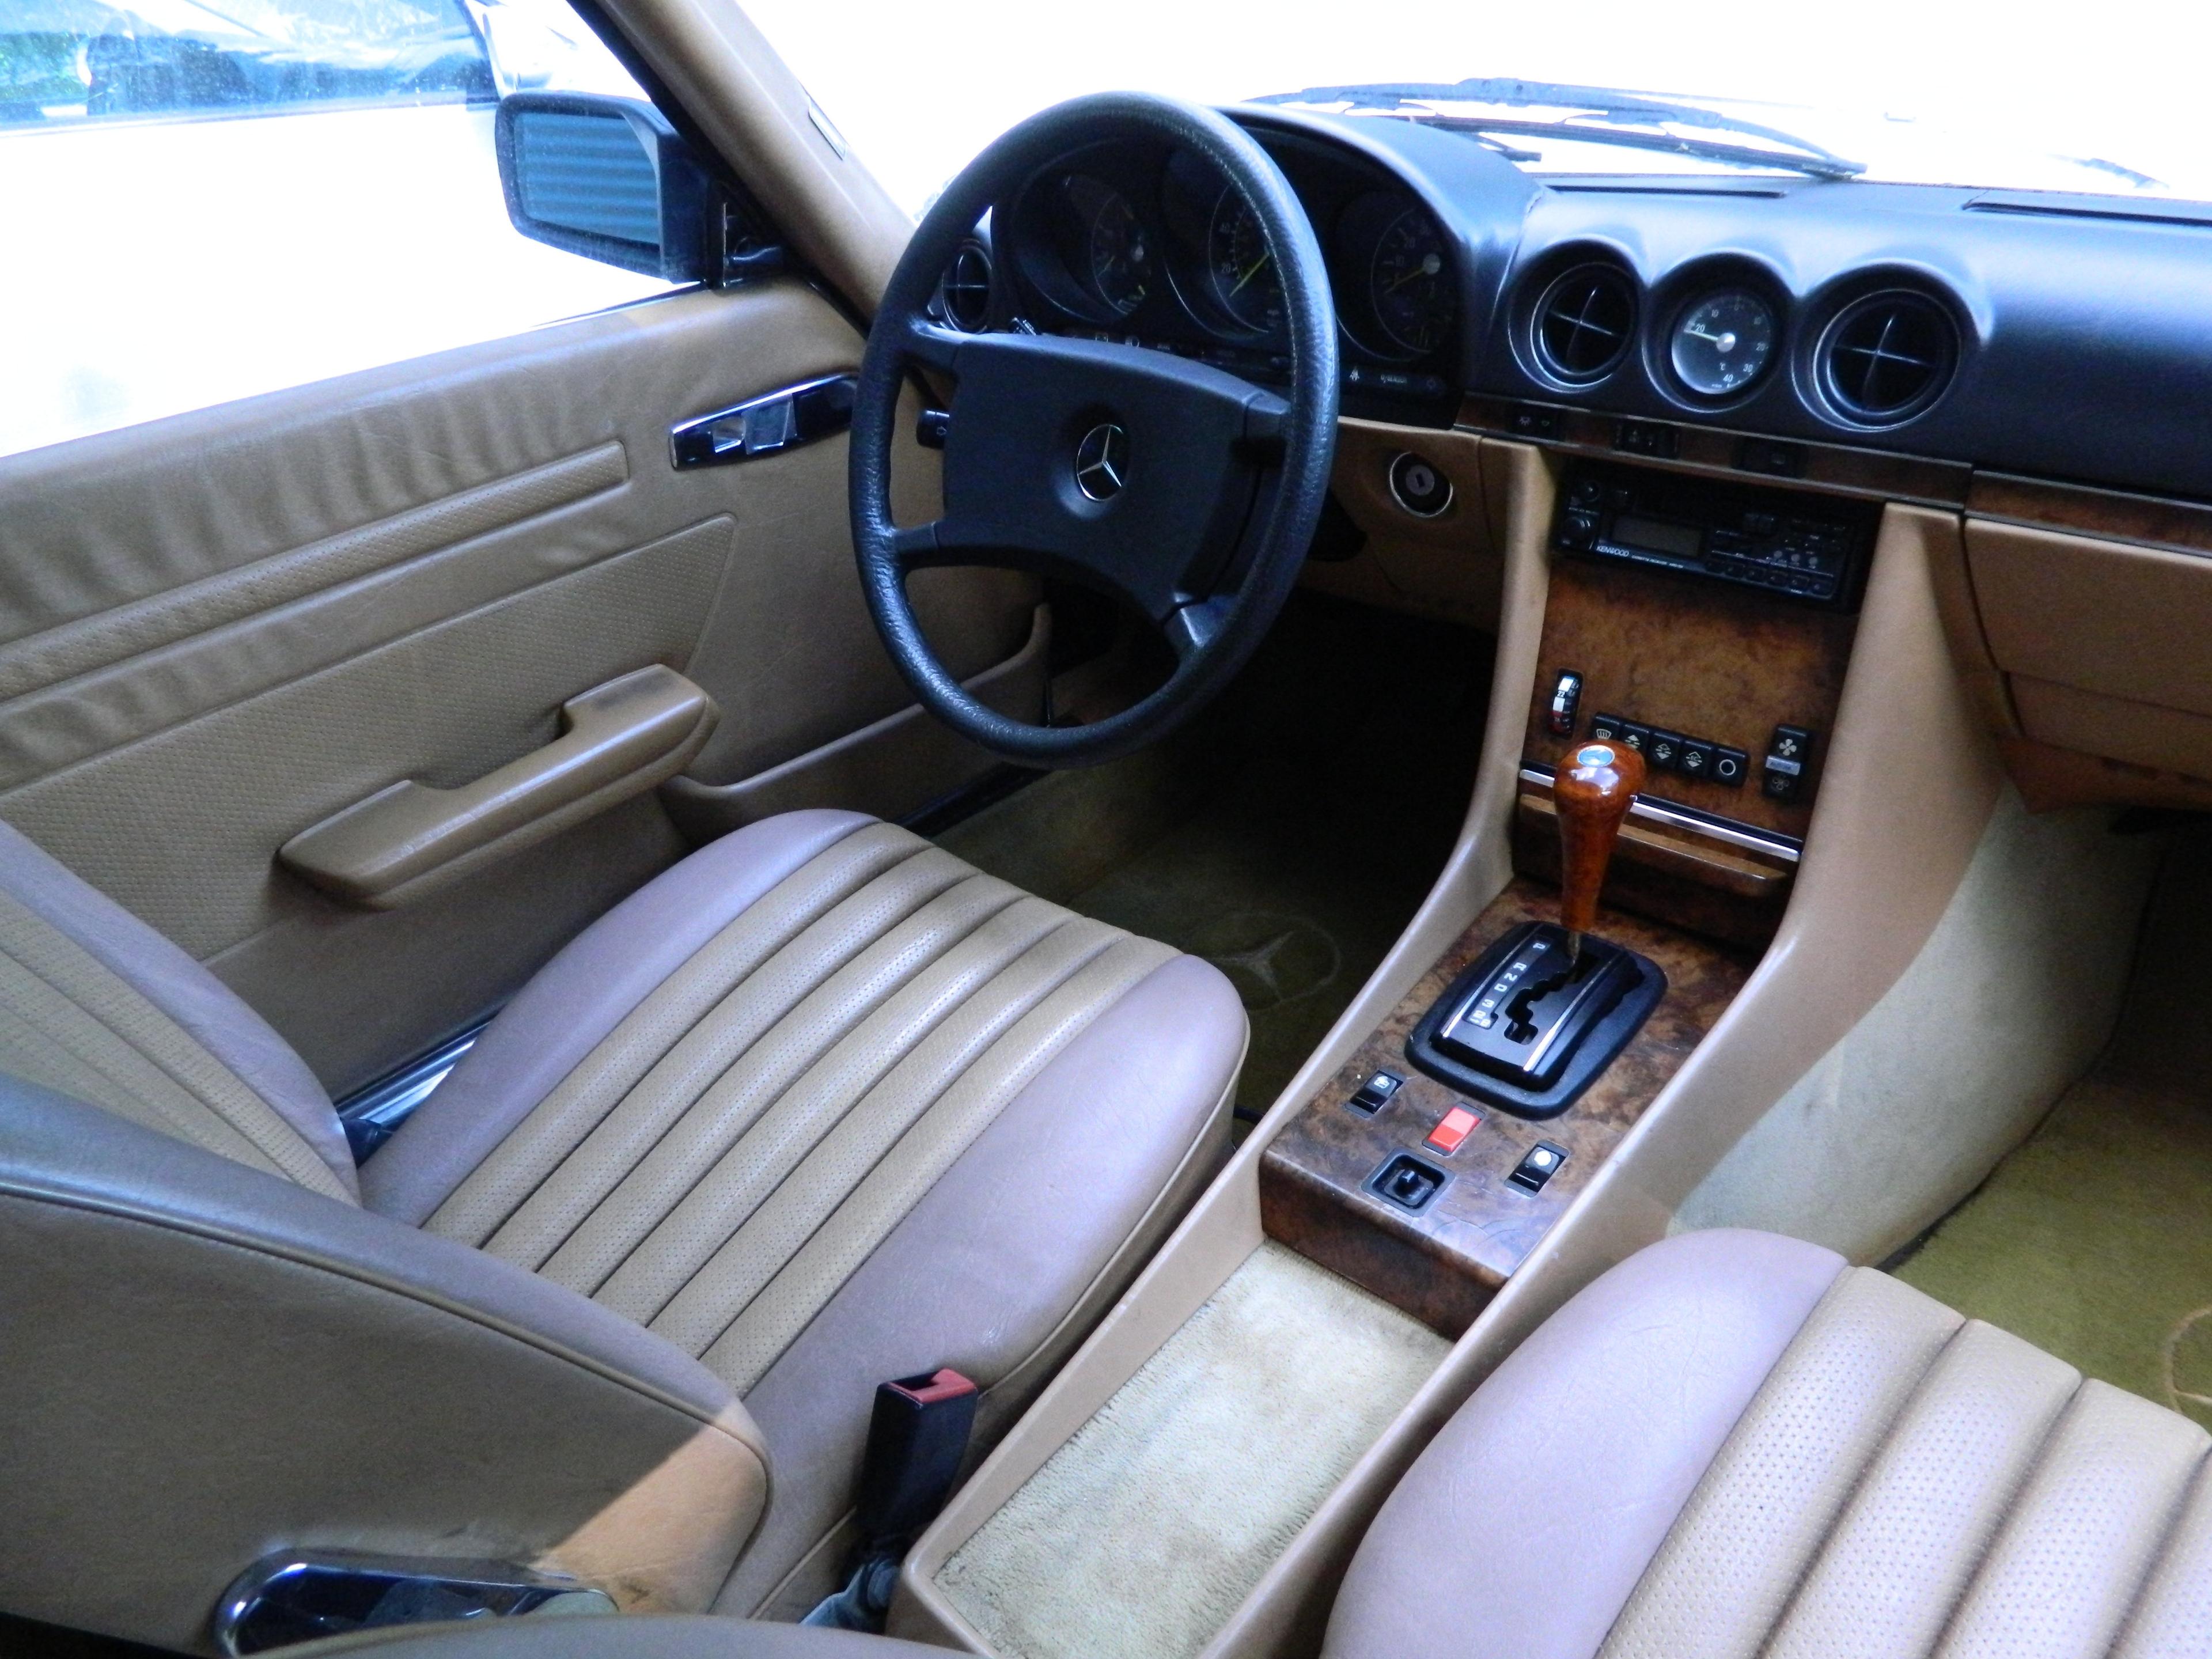 1985 Mercedes Benz 380SL, 3.8L OHC V8, 4 Speed Automatic Transmission. Both Hard and Soft Tops